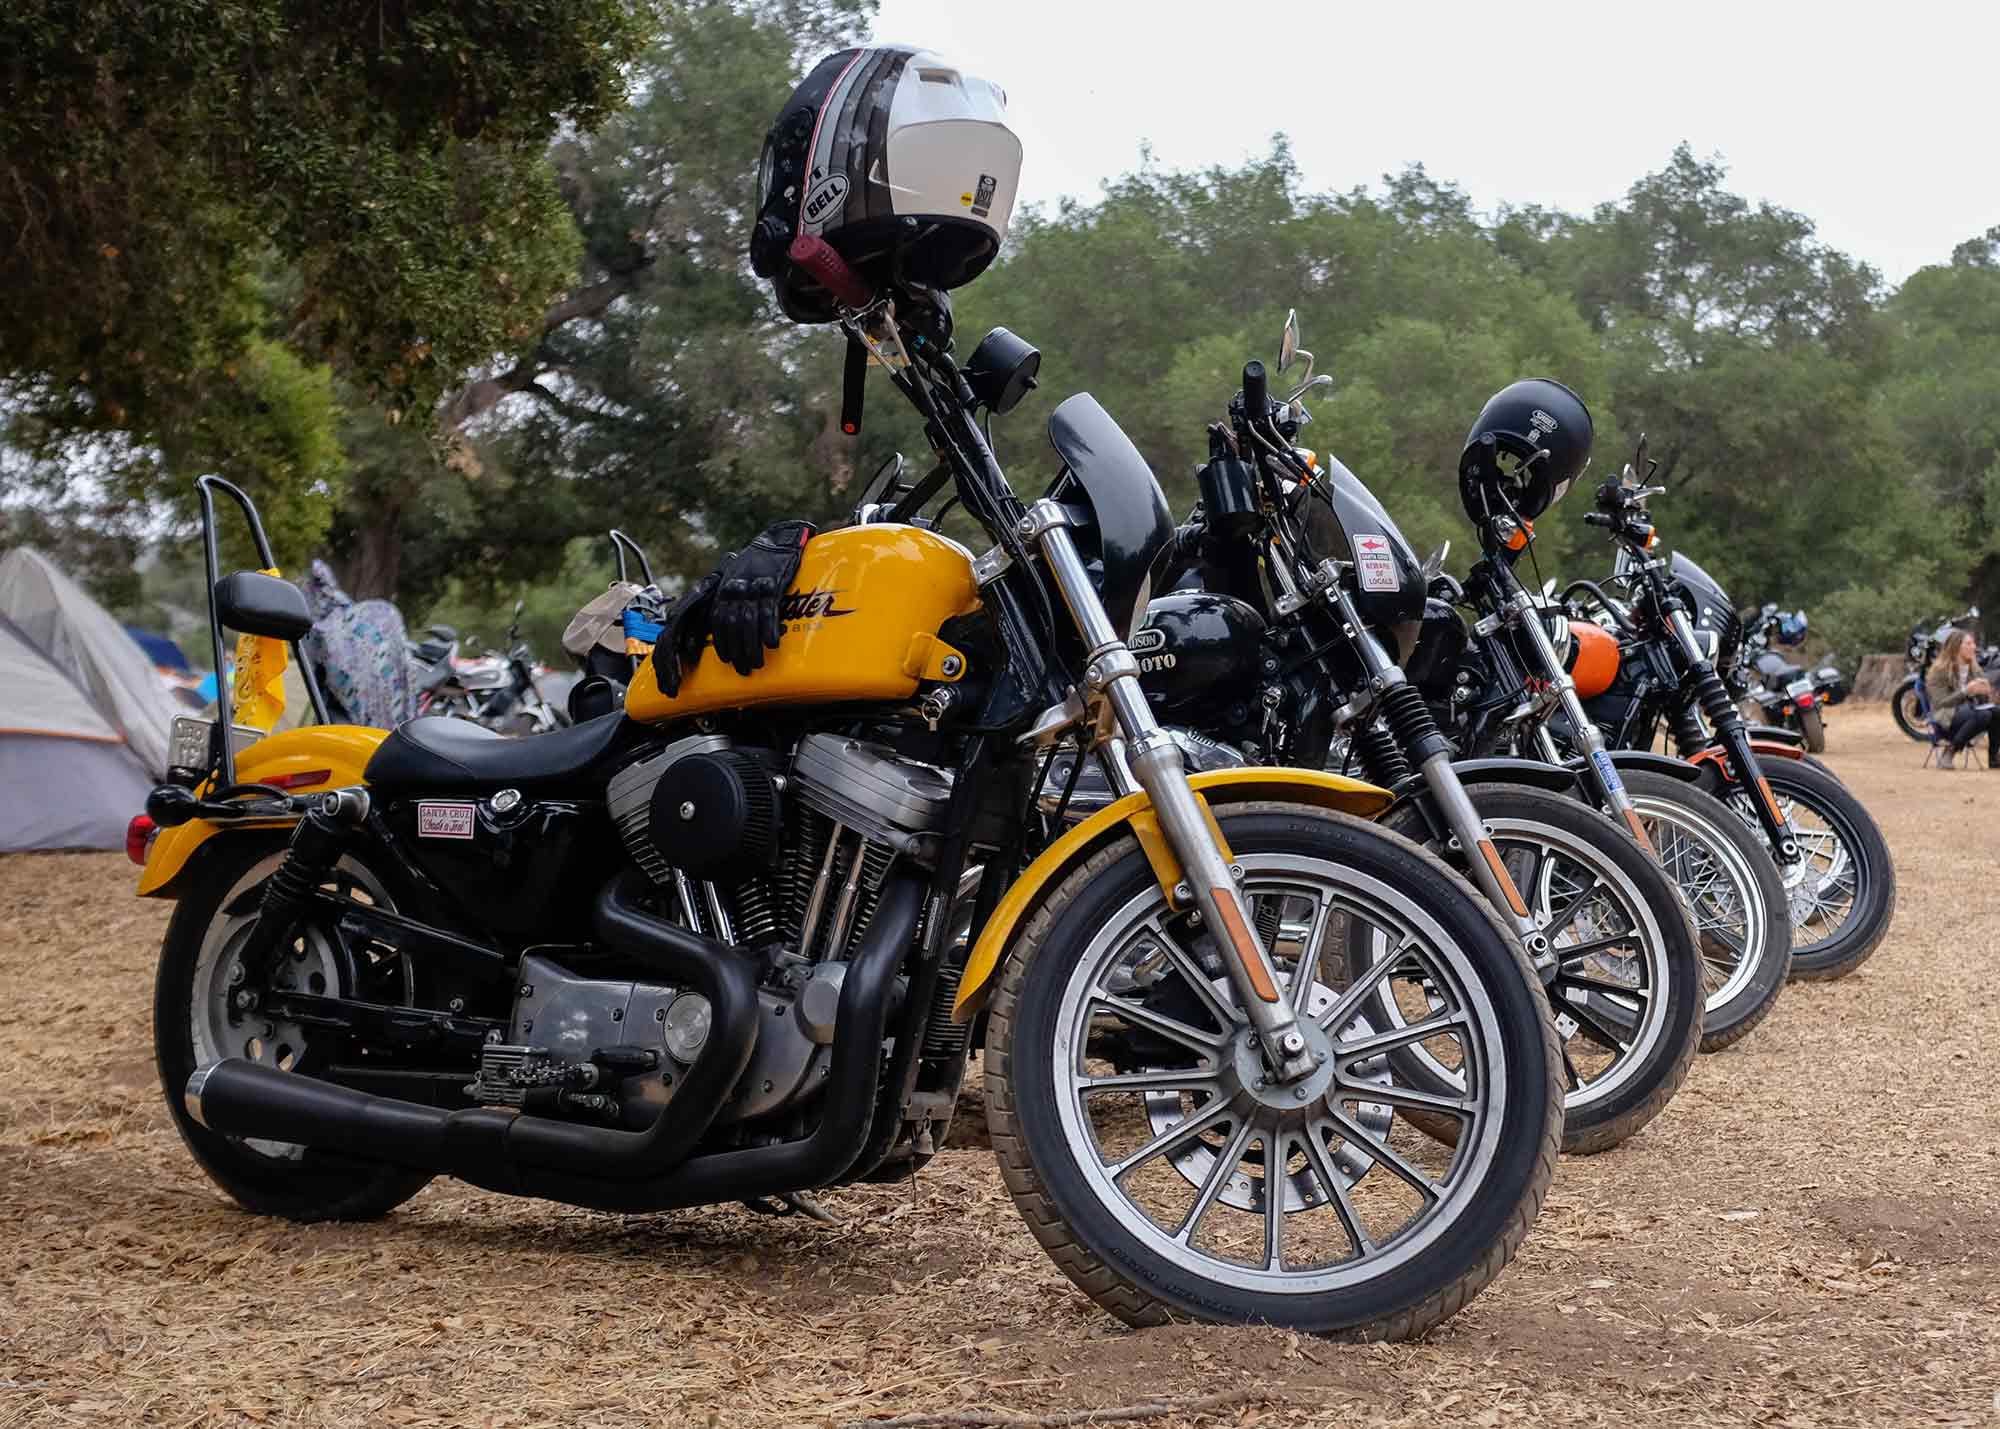 Harley-Davidson is a key sponsor of Babes Ride Out, which is no surprise for the many, many years the Motor Company has supported women in riding.